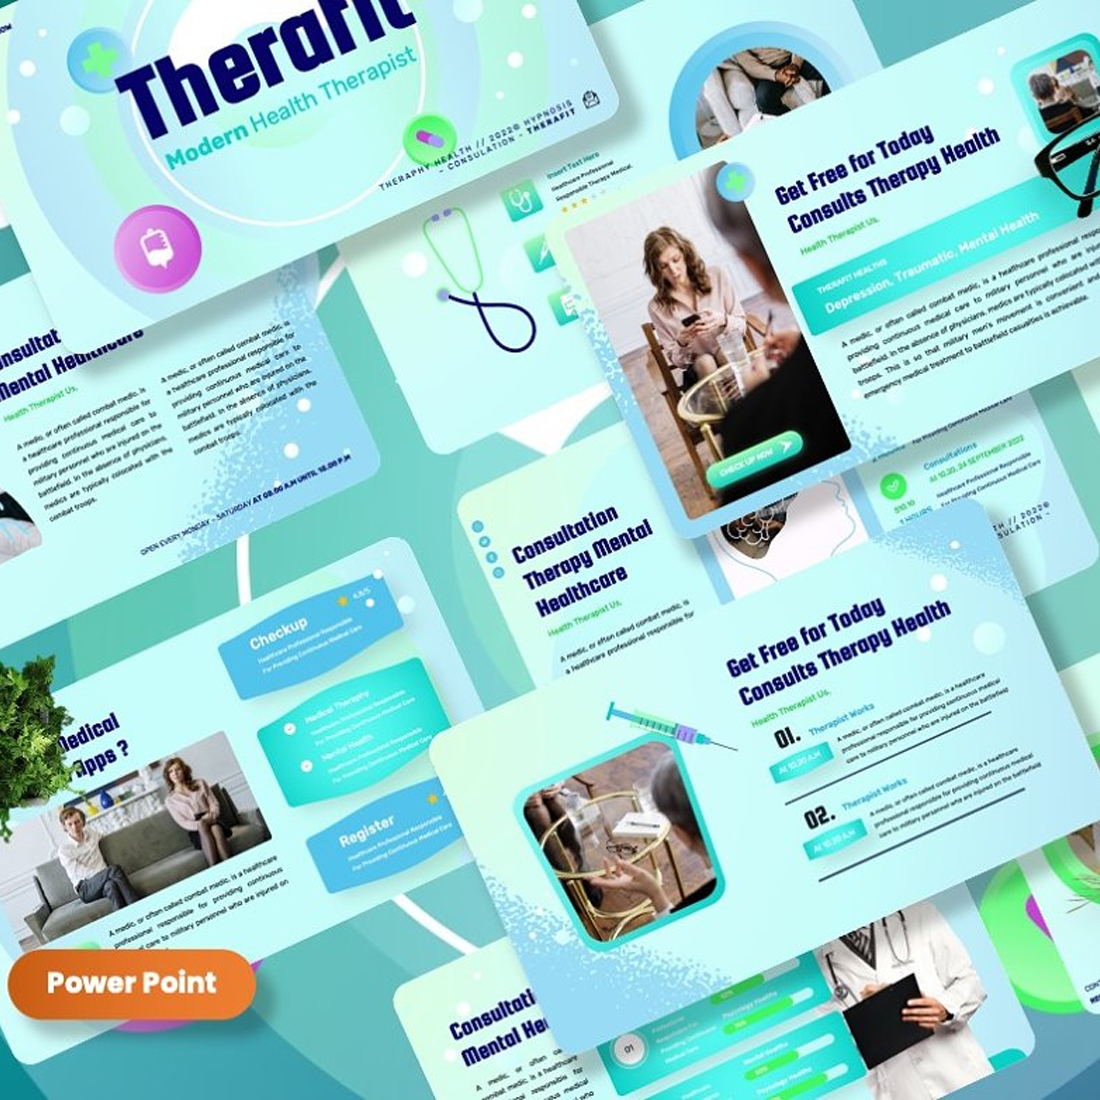 Images preview therafit modern health powerpoint.